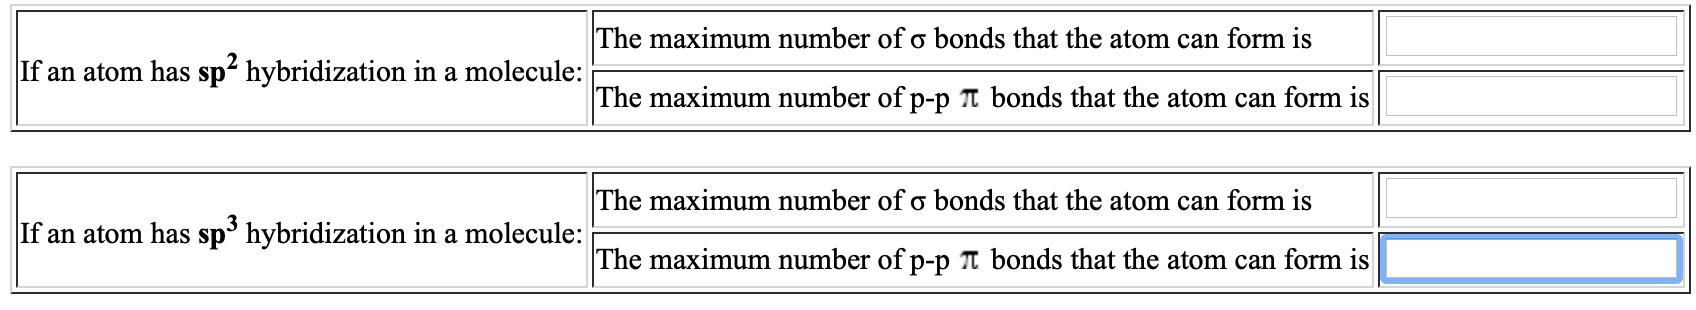 The maximum number of o bonds that the atom can form is
If an atom has sp? hybridization in a molecule:
The maximum number of p-p T bonds that the atom can form is
The maximum number of o bonds that the atom can form is
If an atom has sp³ hybridization in a molecule:
The maximum number of p-p T bonds that the atom can form is
